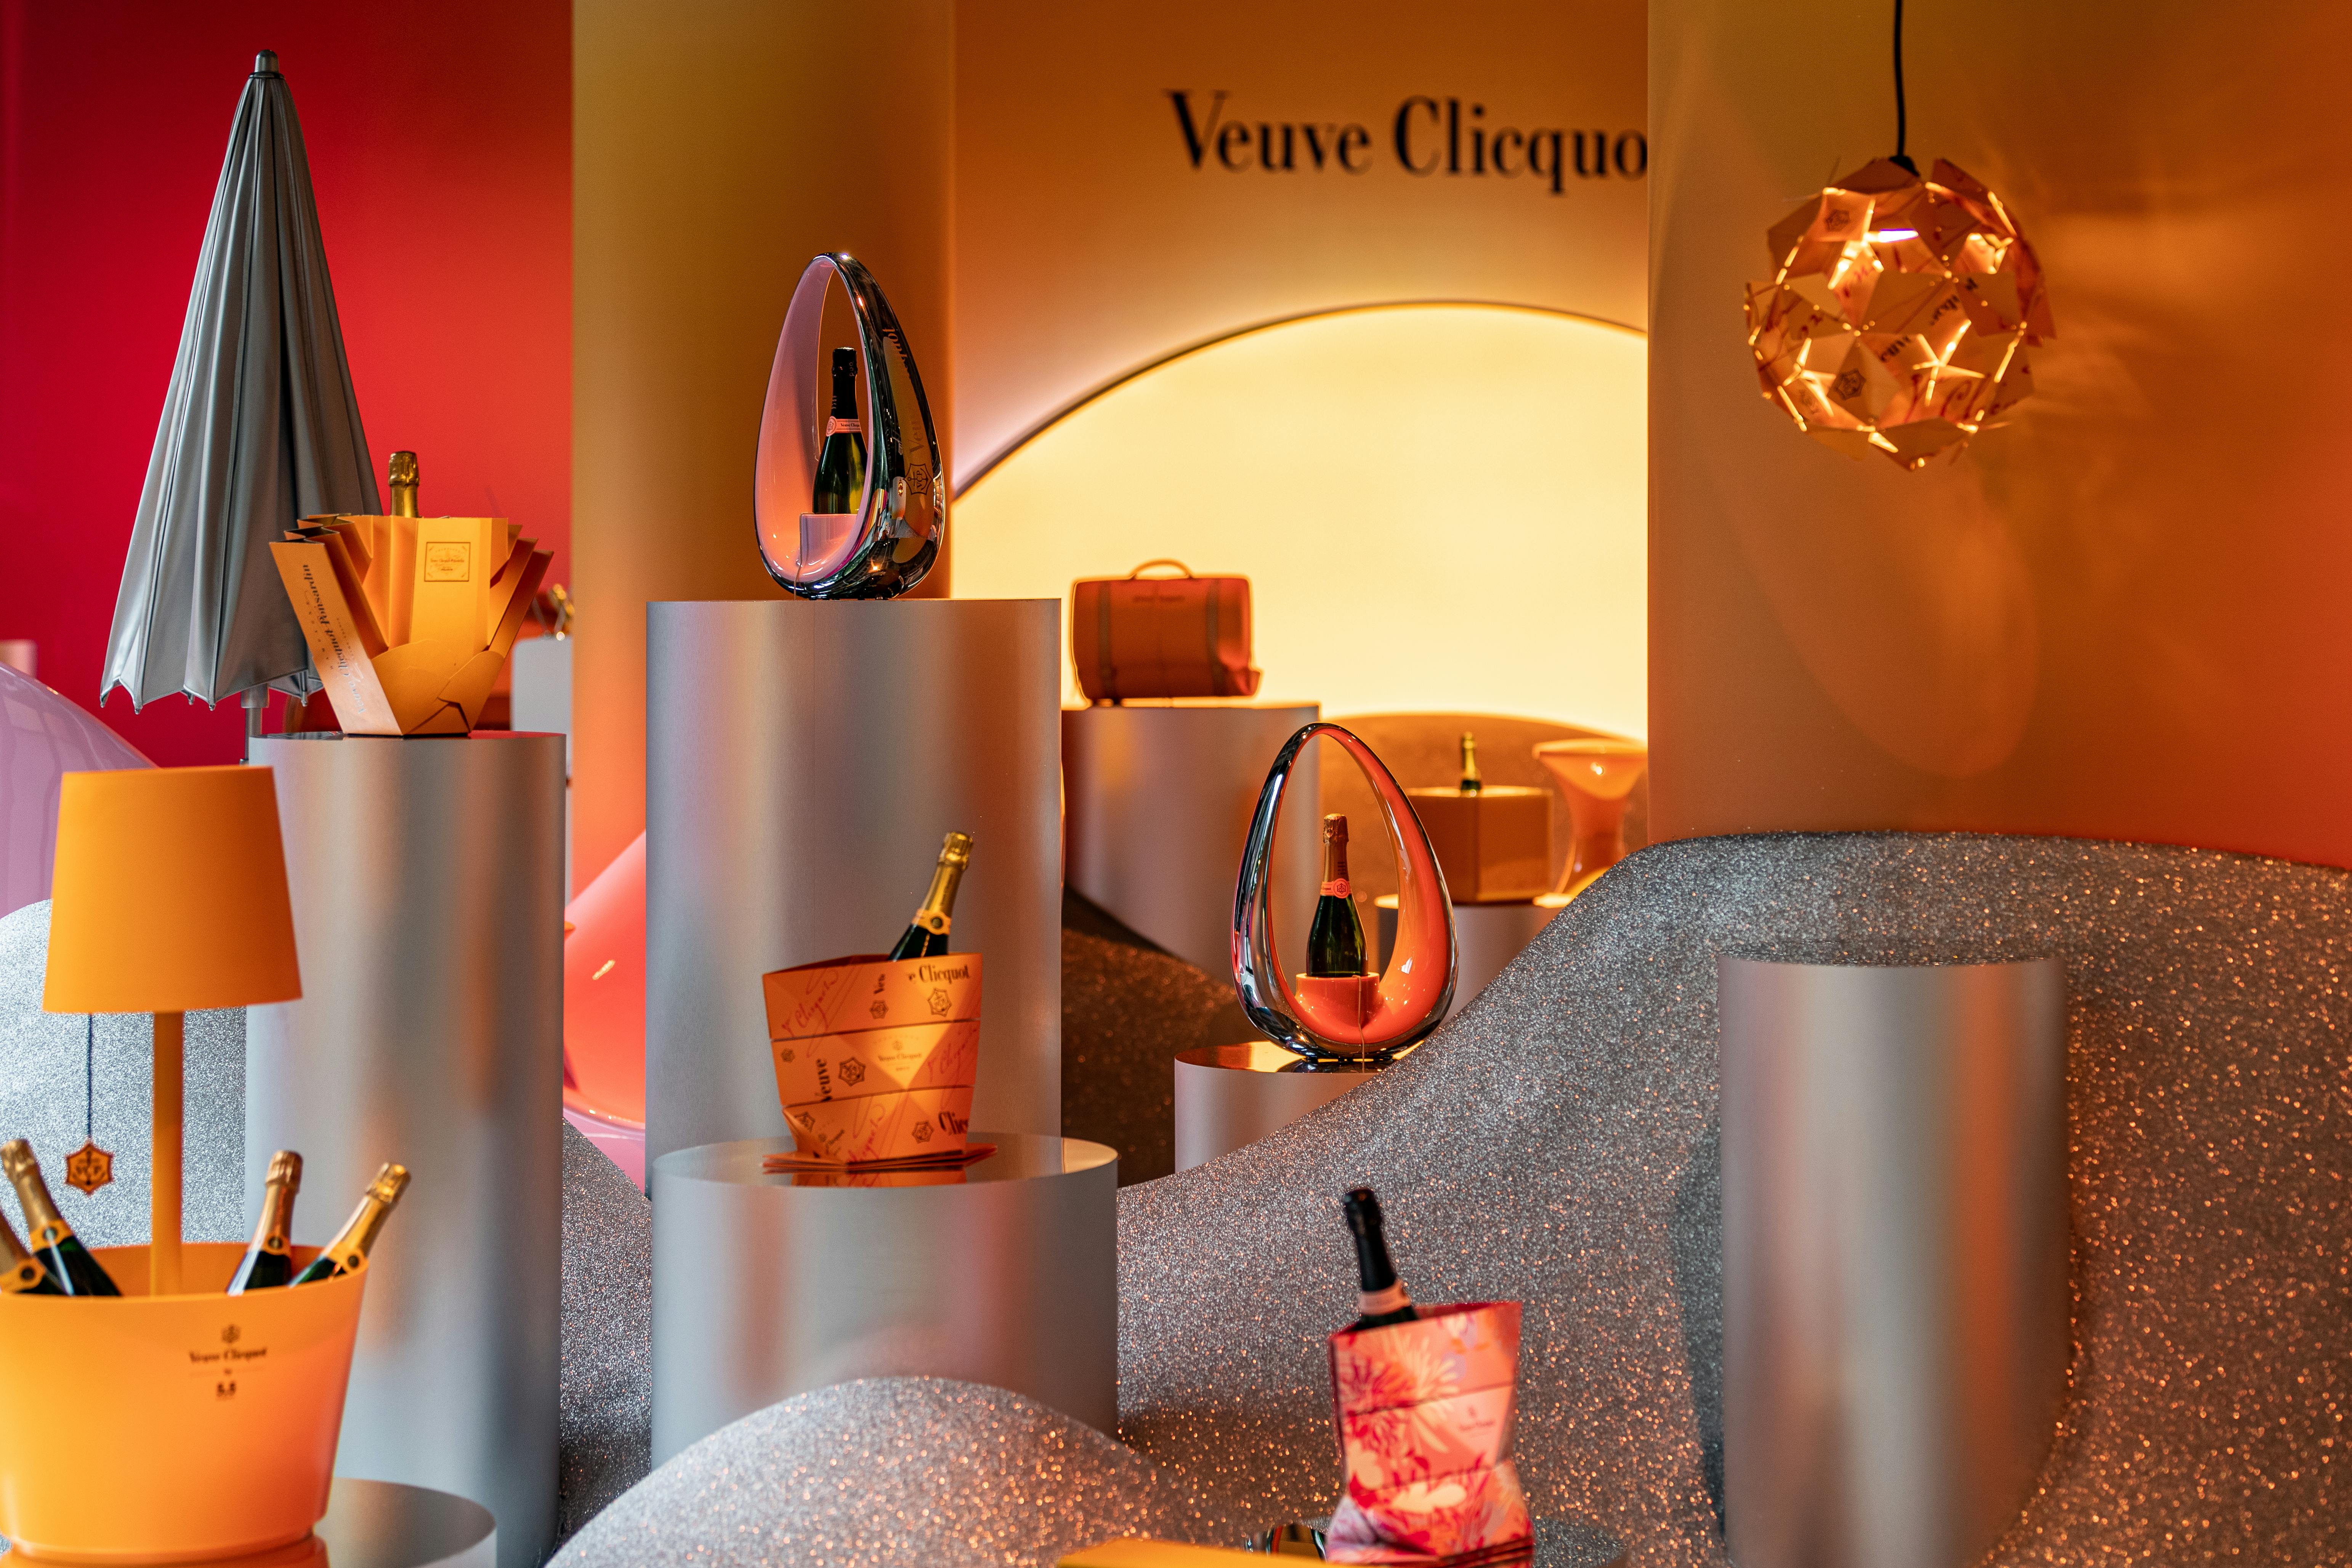 Moët Hennessy opens sole GTR pop-up for Veuve Clicquot 250th